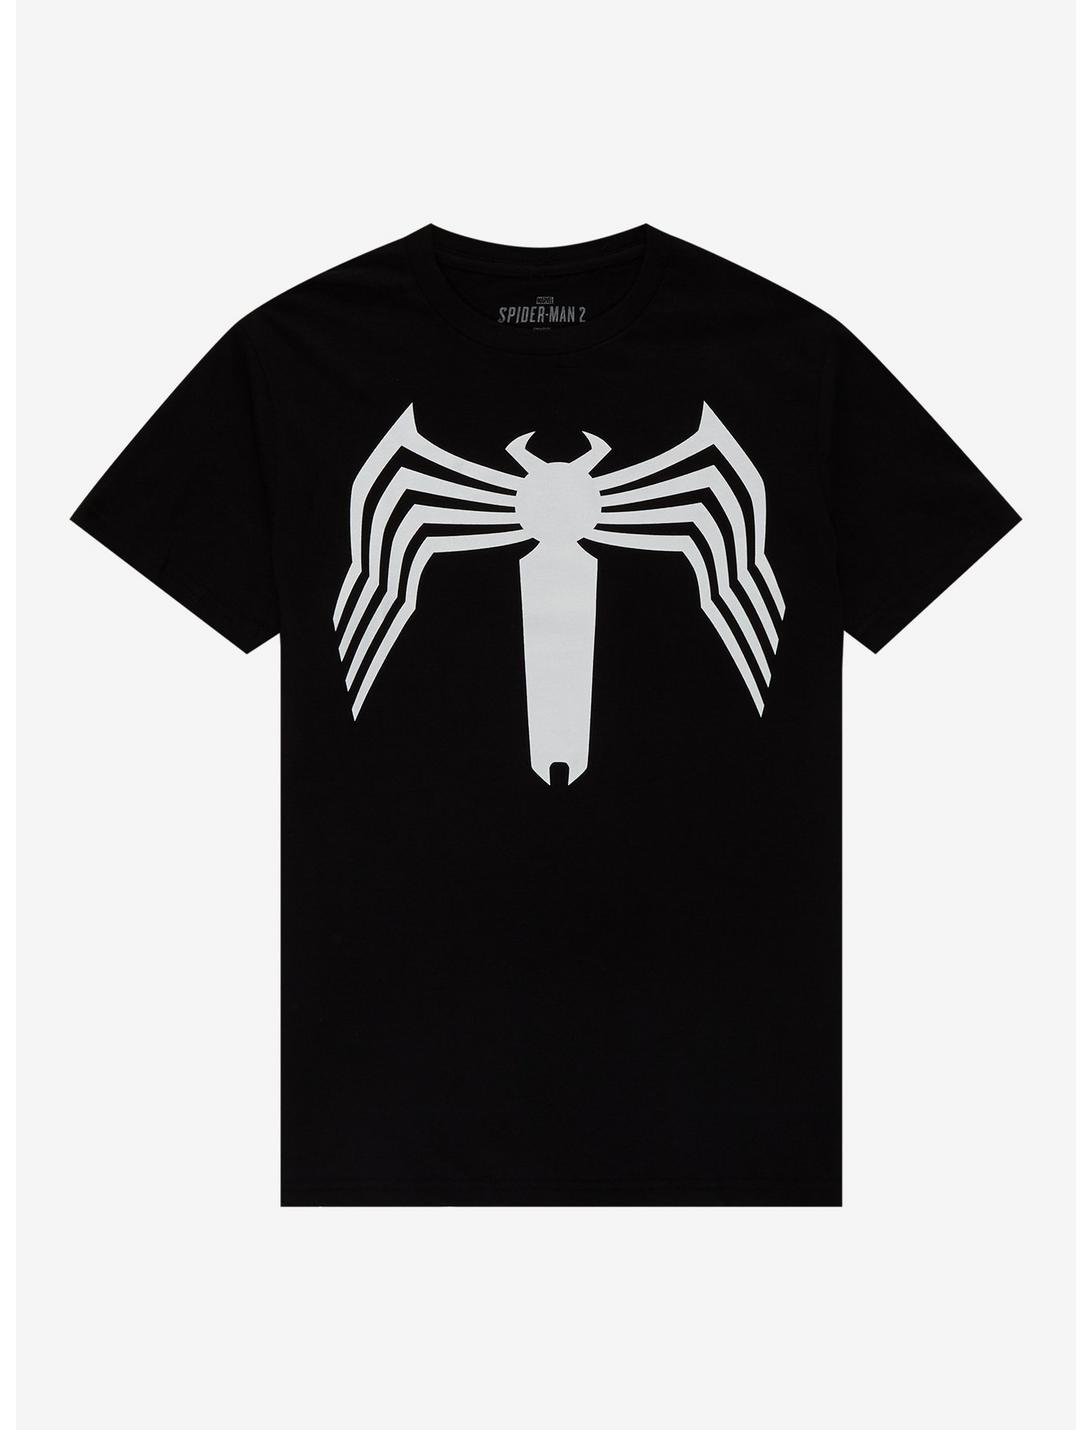 Marvel Spider-Man 2 Game Black Suit T-Shirt | Hot Topic